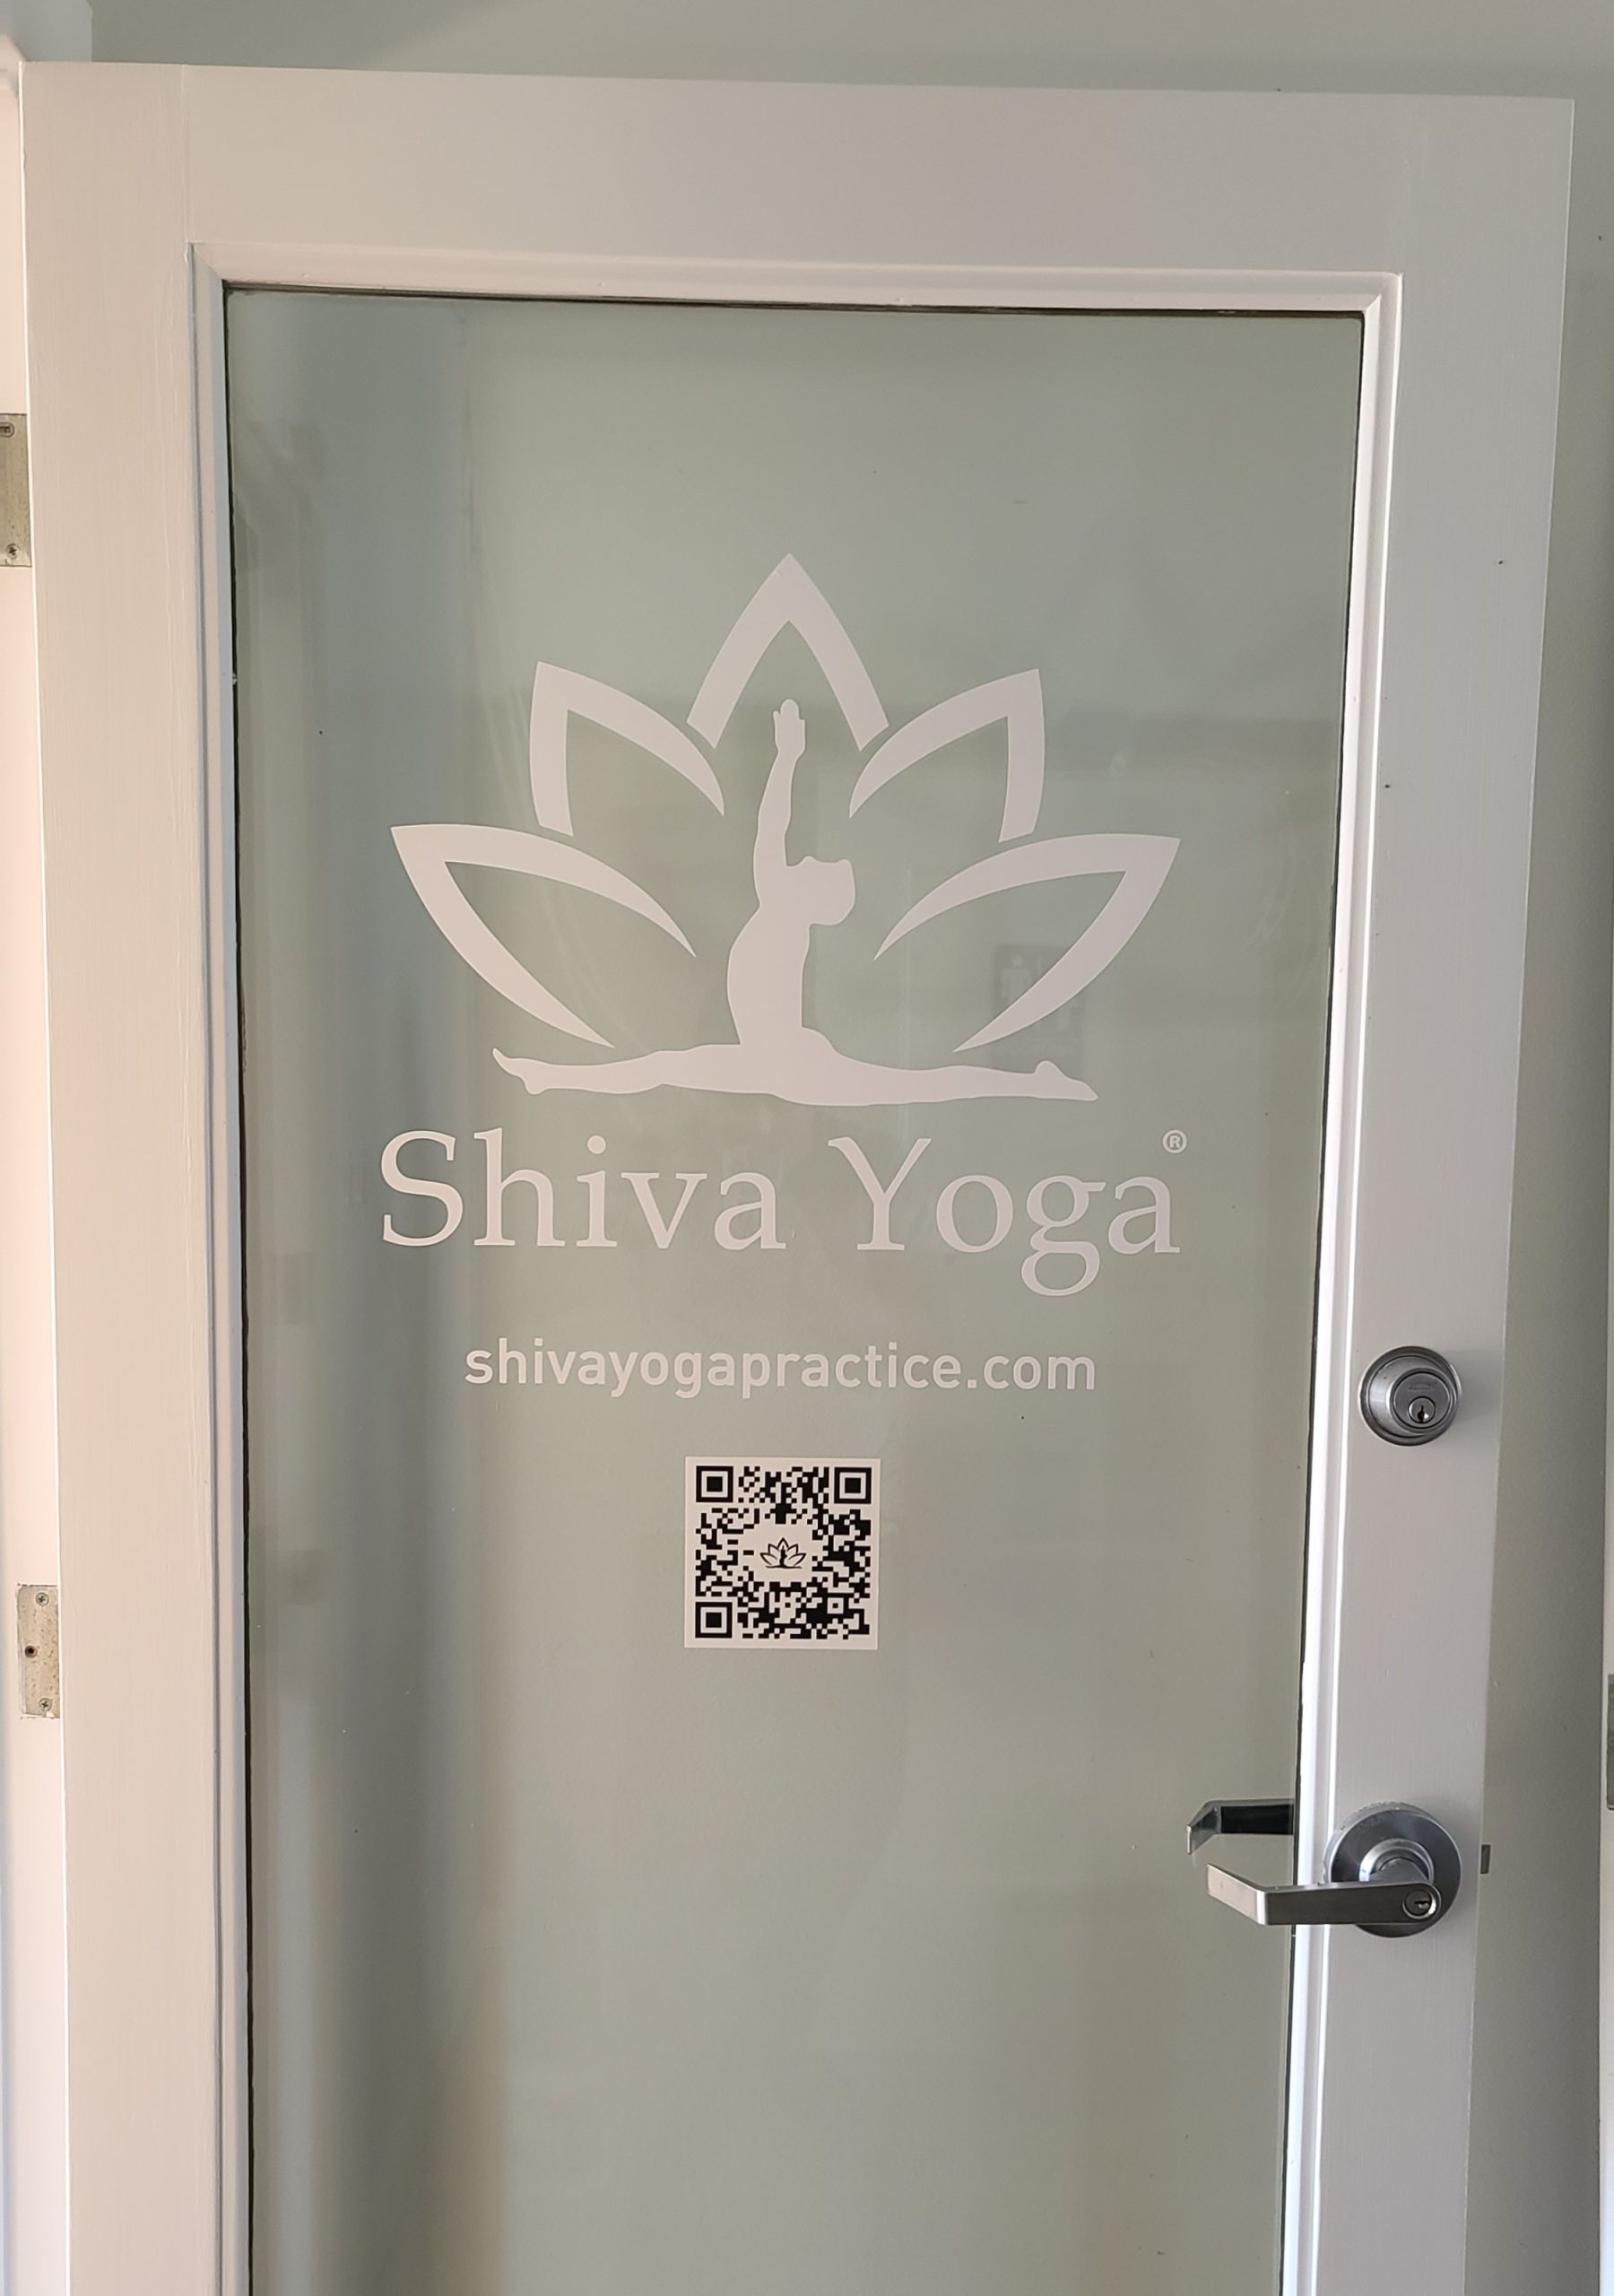 Studio door graphics we made for Shiva Yoga's West Hollywood branch. These entrance signs greet arriving members and hype them up for their sessions.